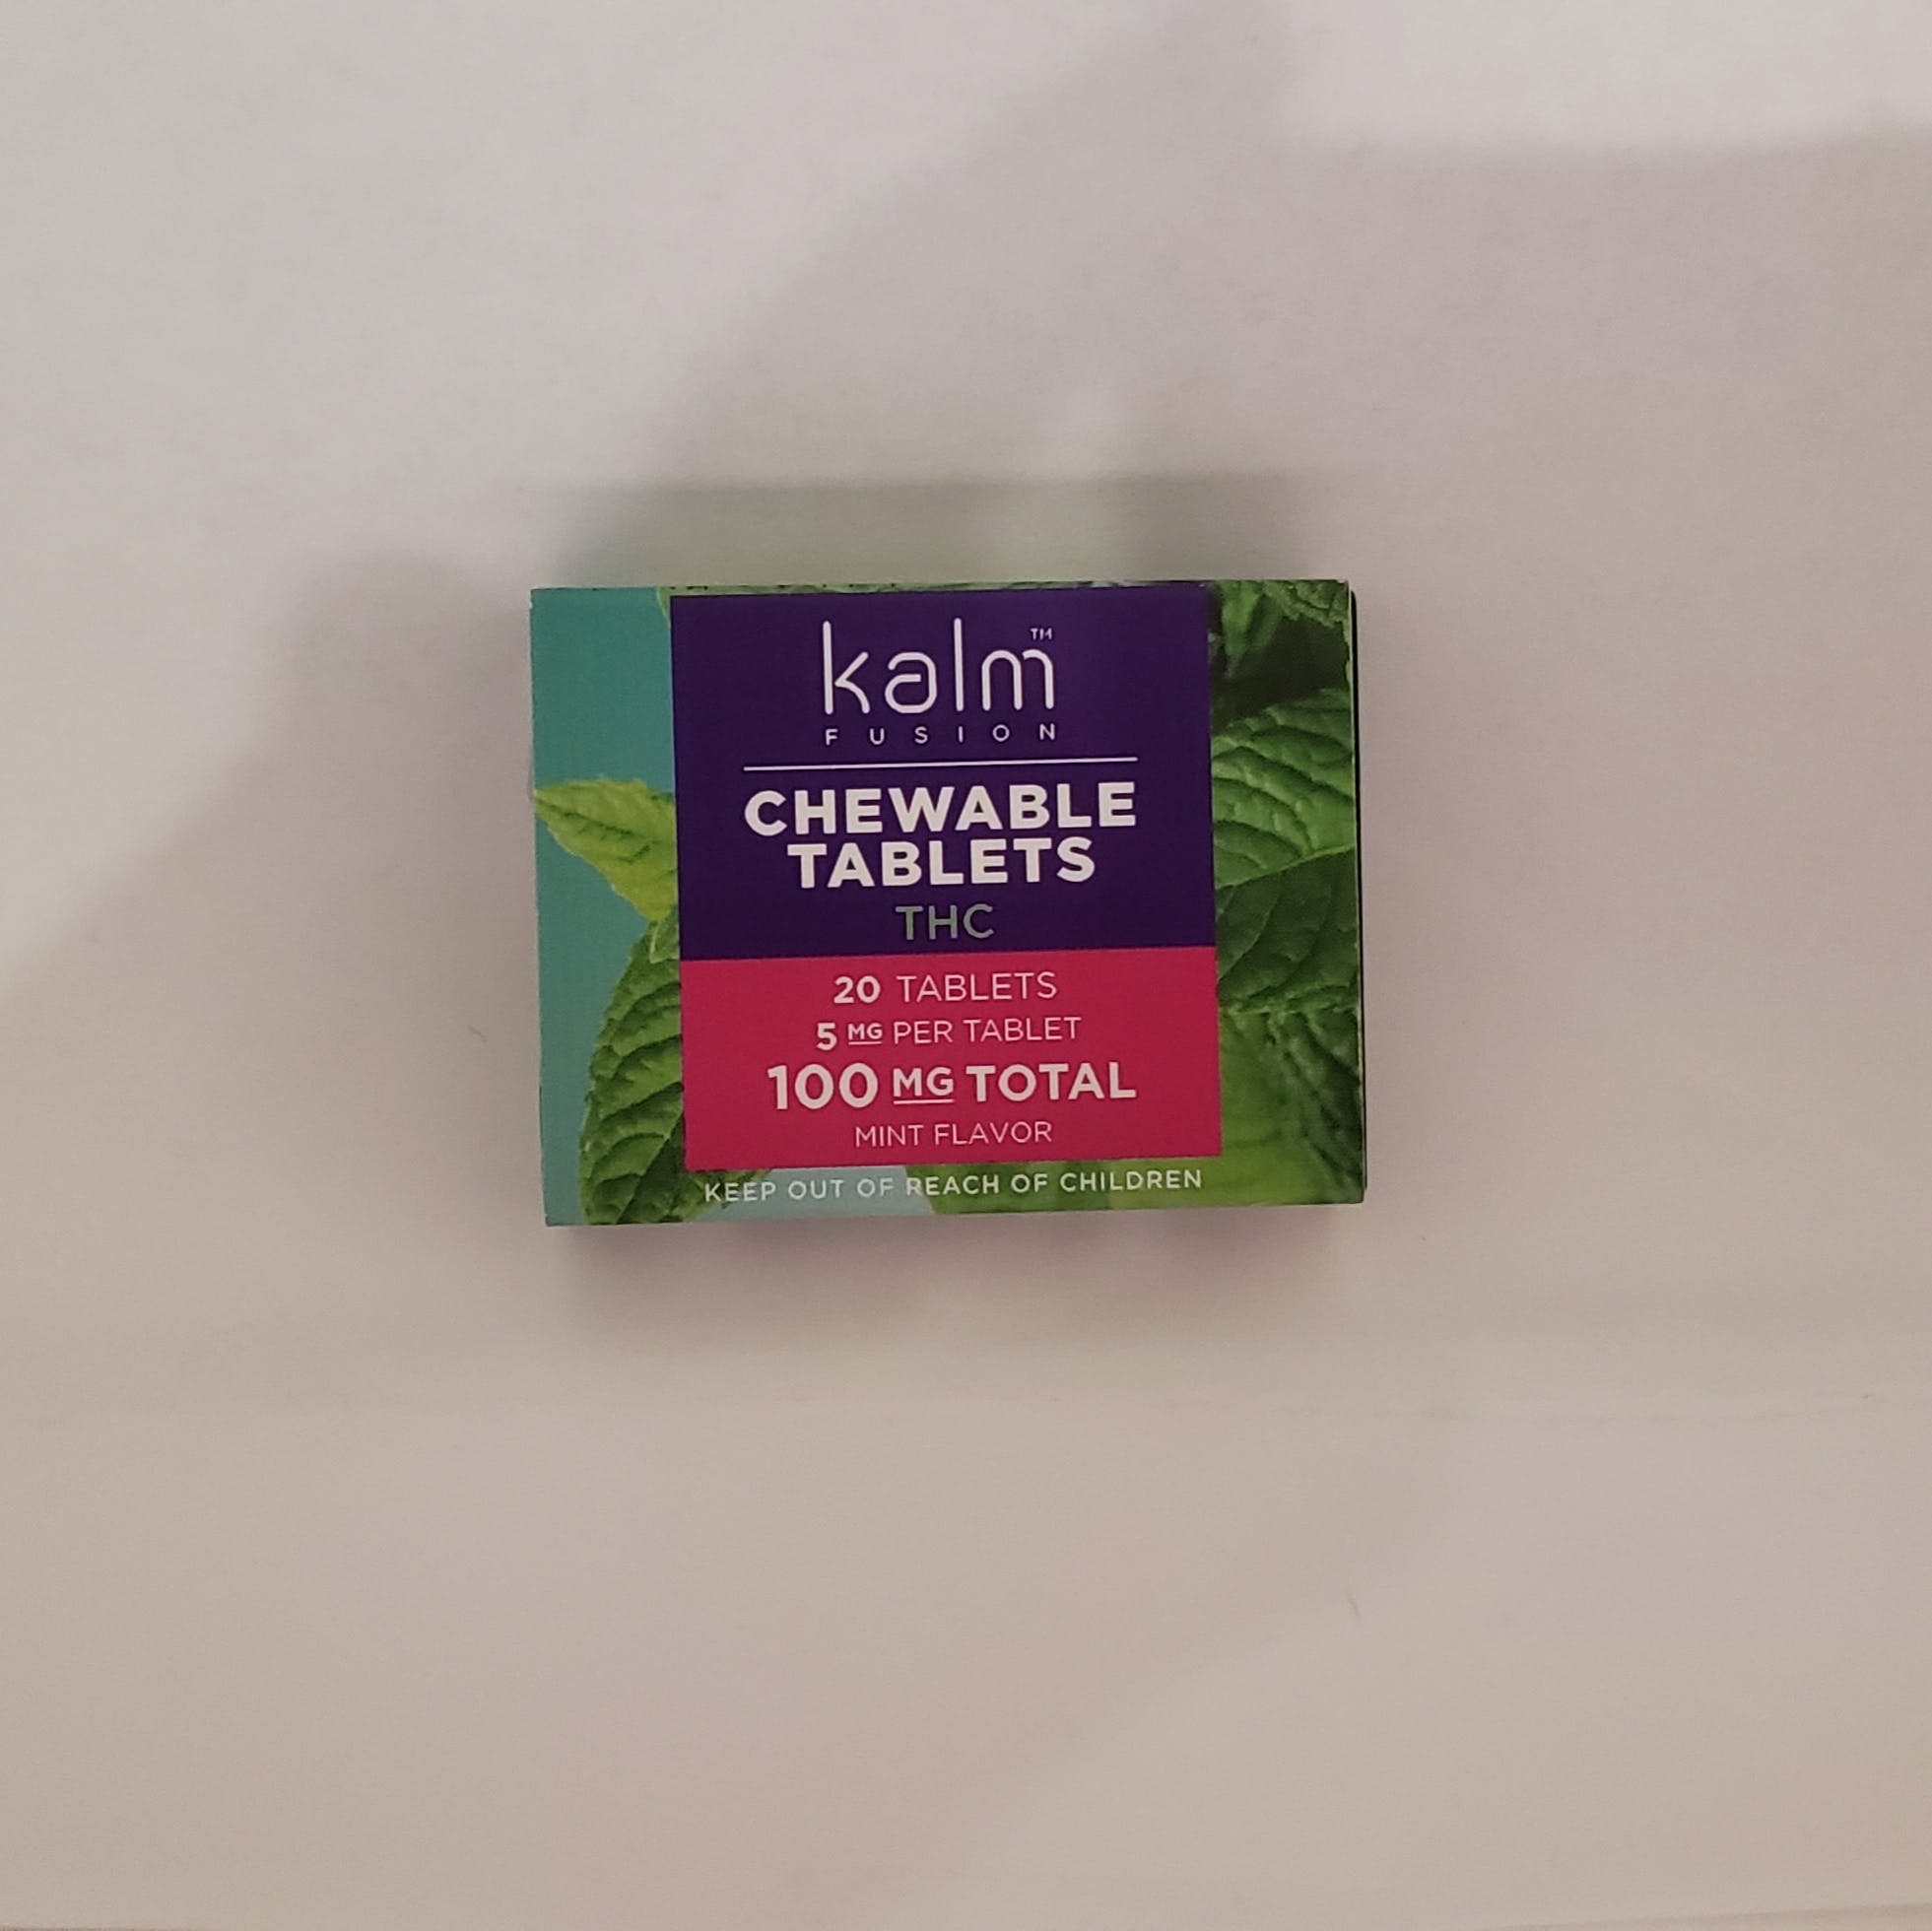 Kalm Chewable THC 100mg Tablets